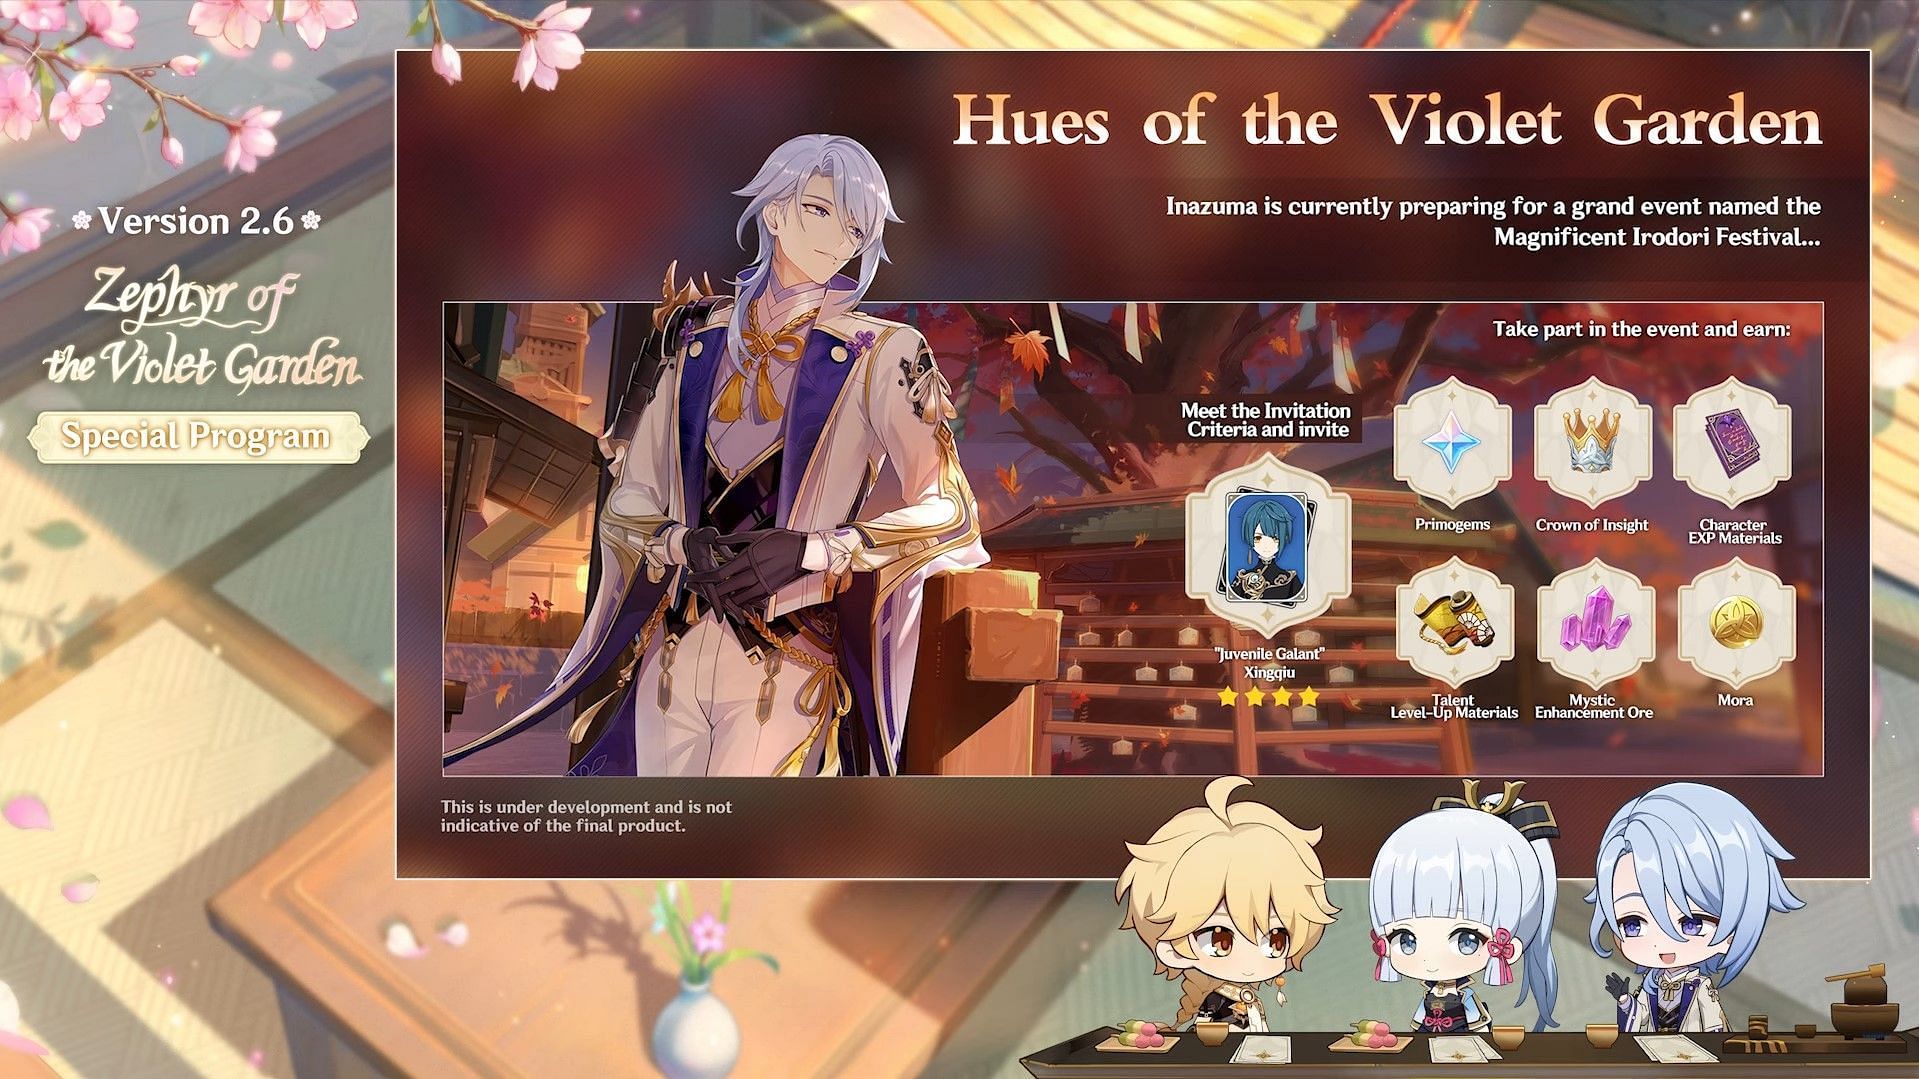 Hues of the Violet Garden, as it was seen in the recent Special Program (Image via miHoYo)